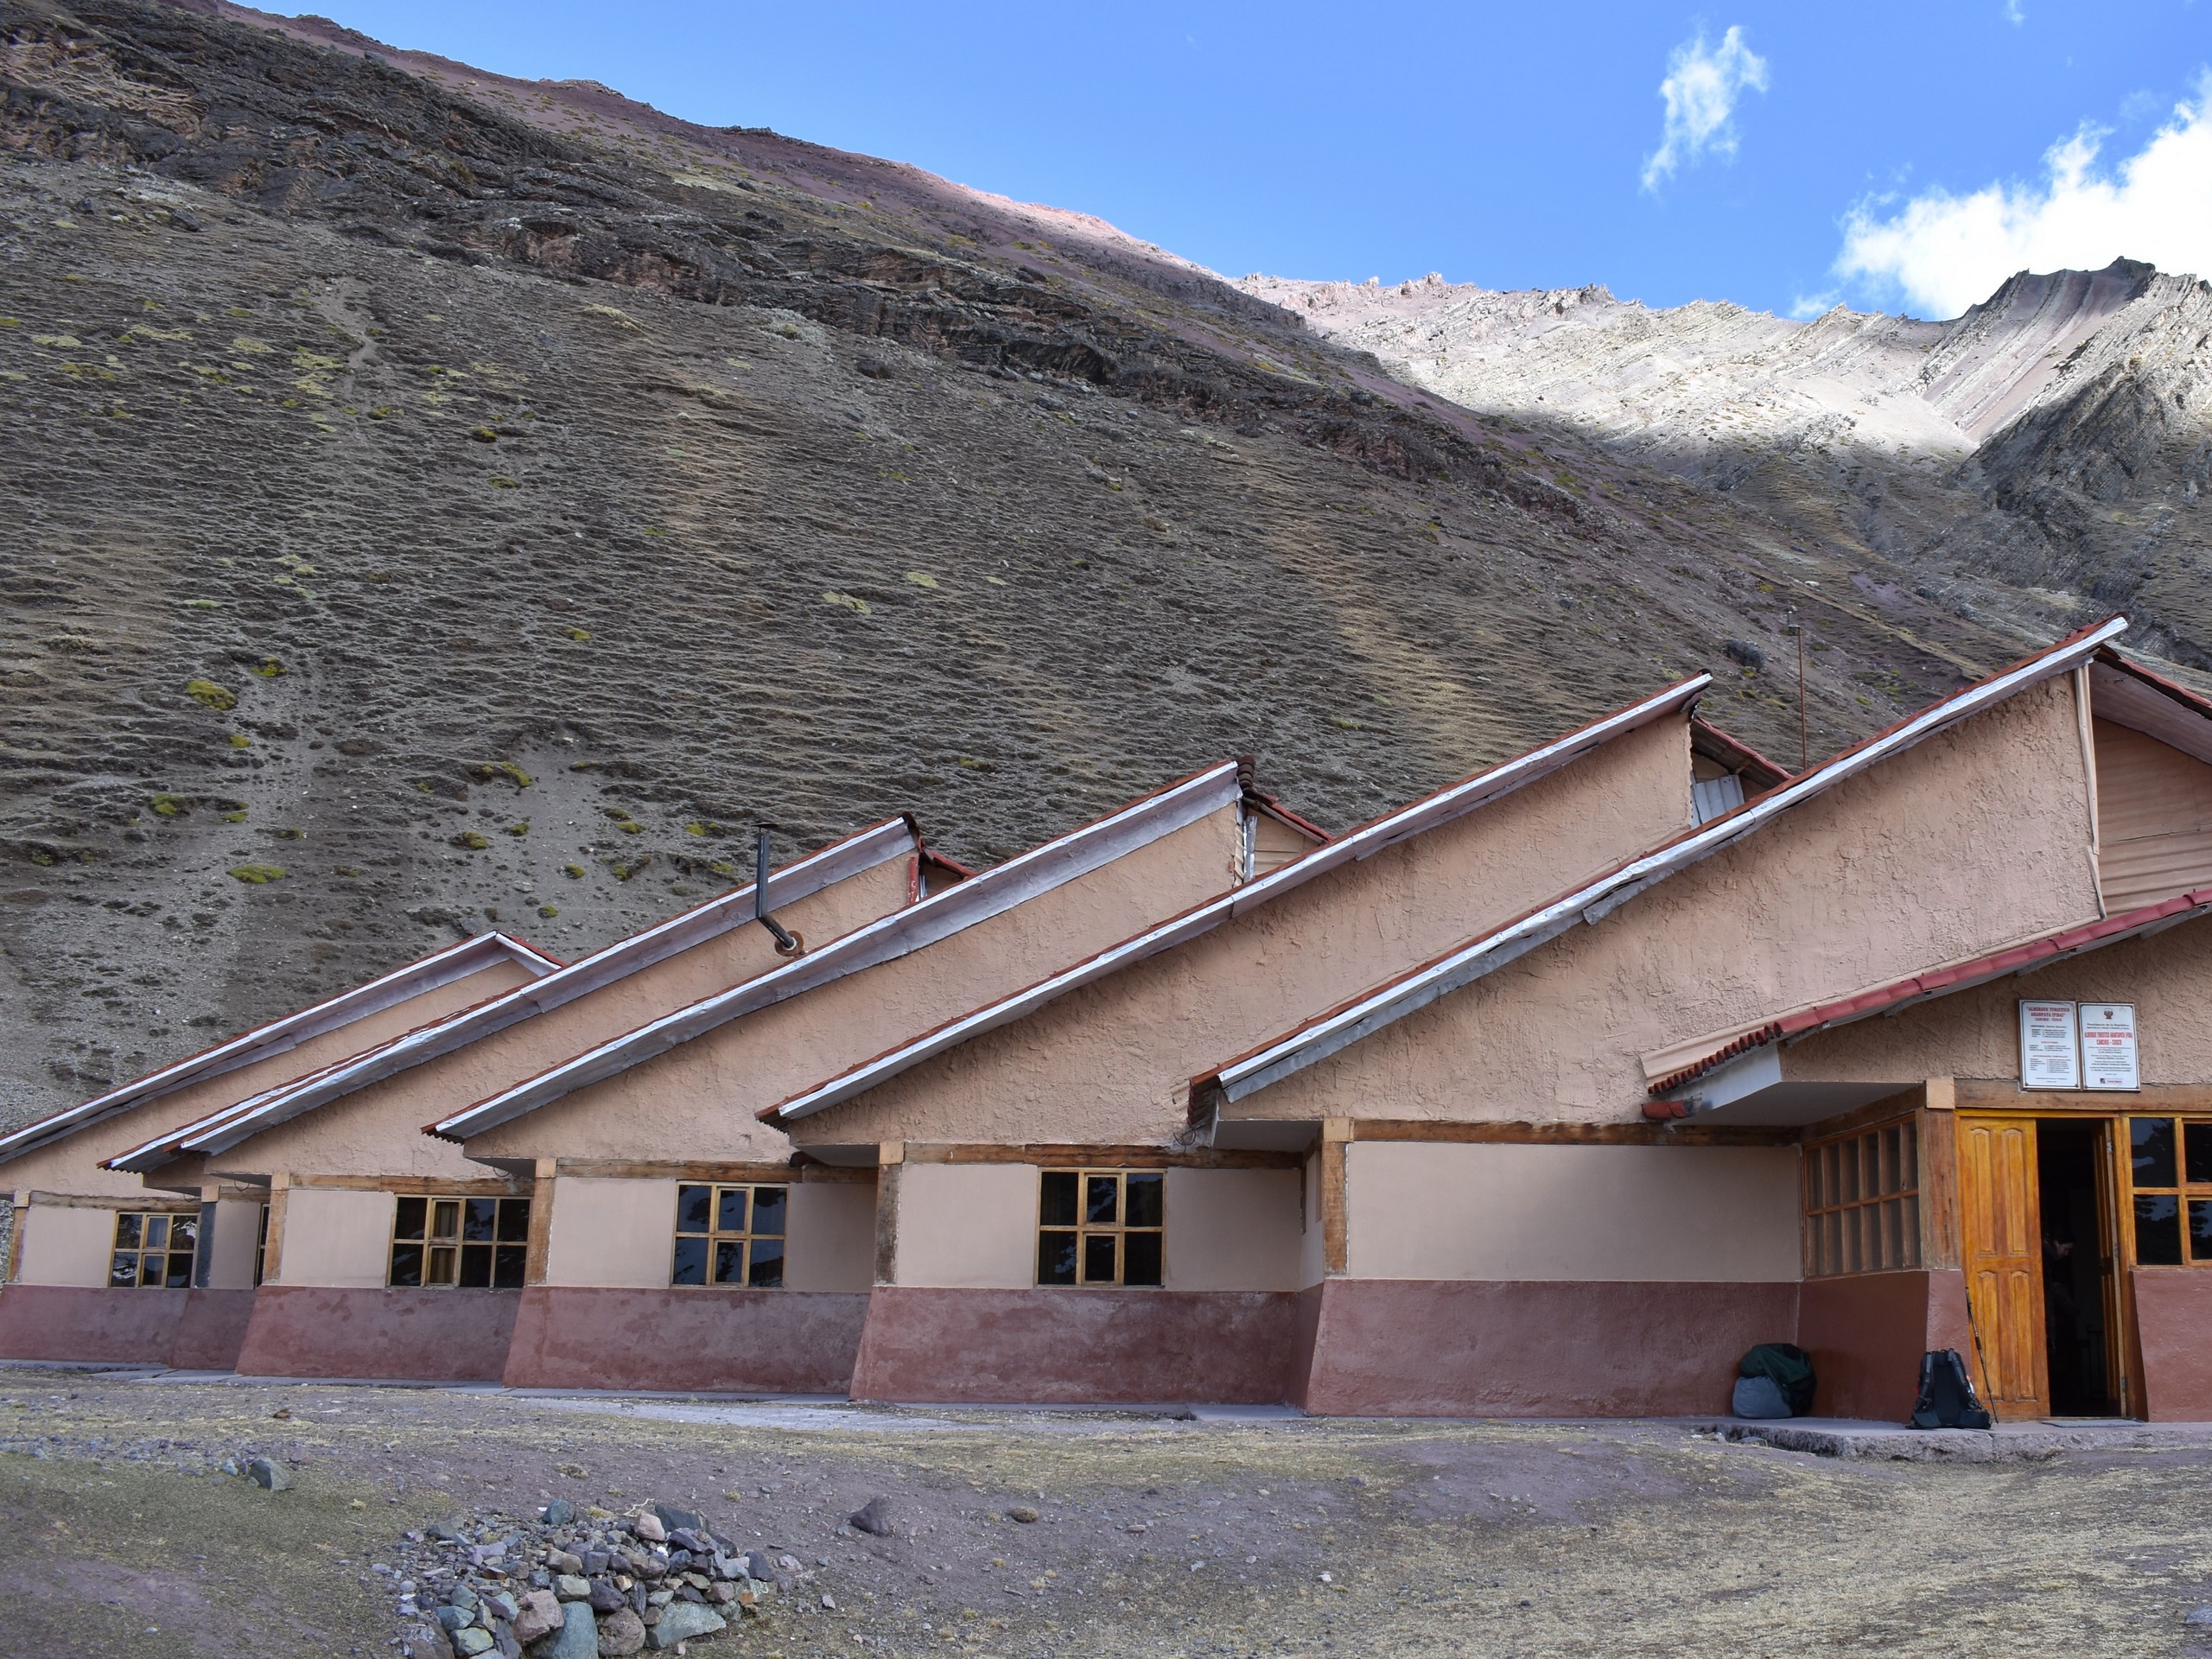 Anantapata Lodge in Peru, visited while on guided trek